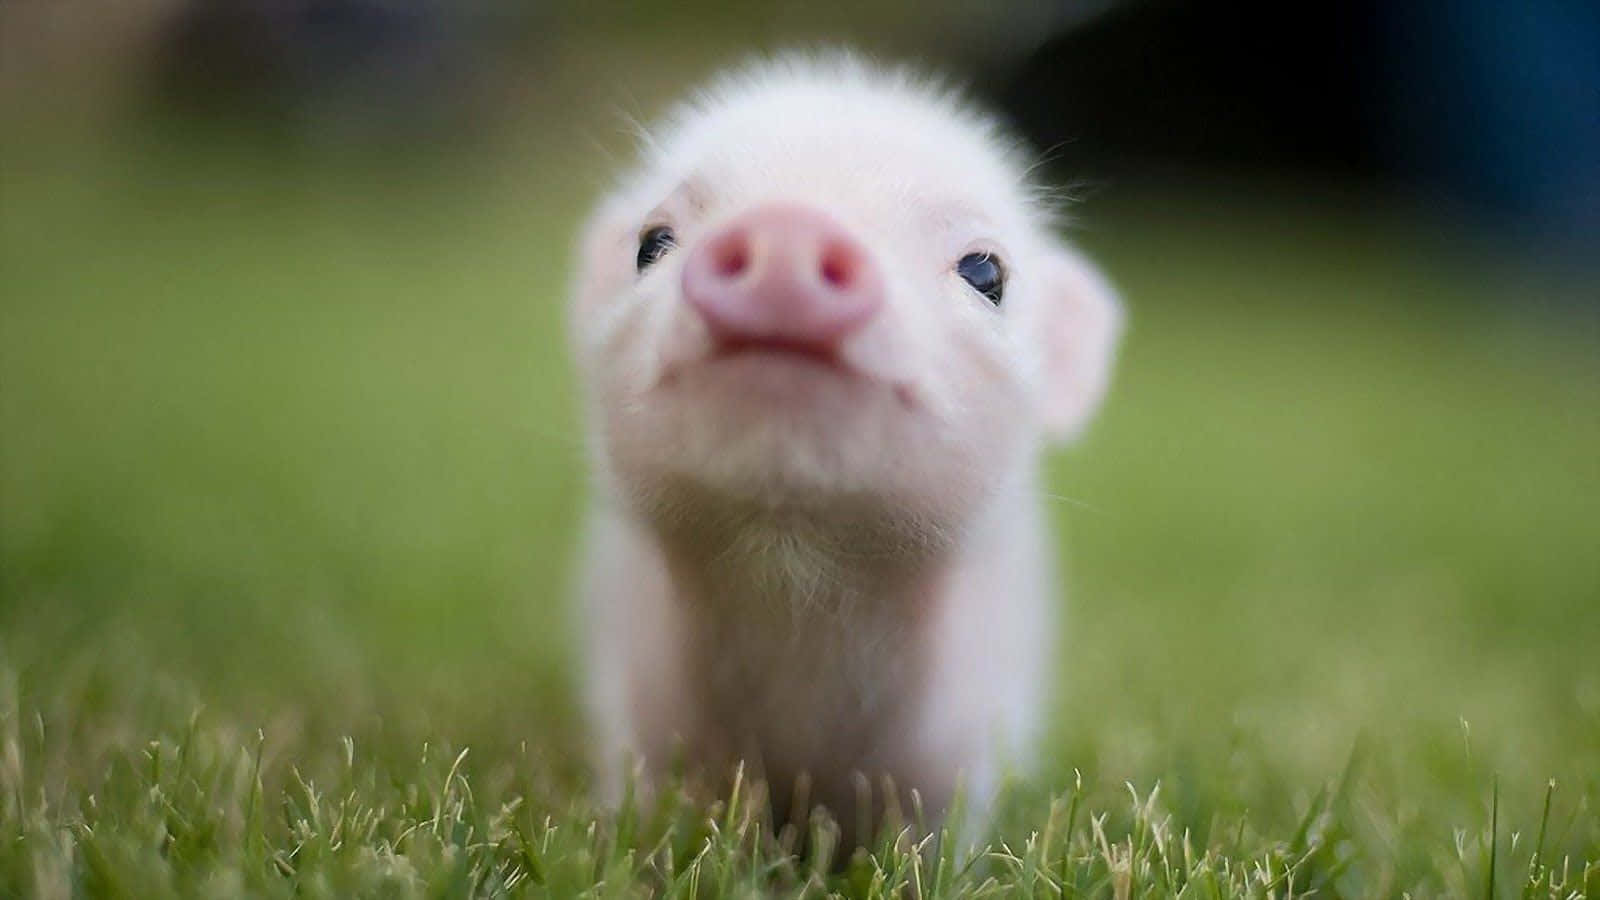 A Small Pig Is Standing In The Grass